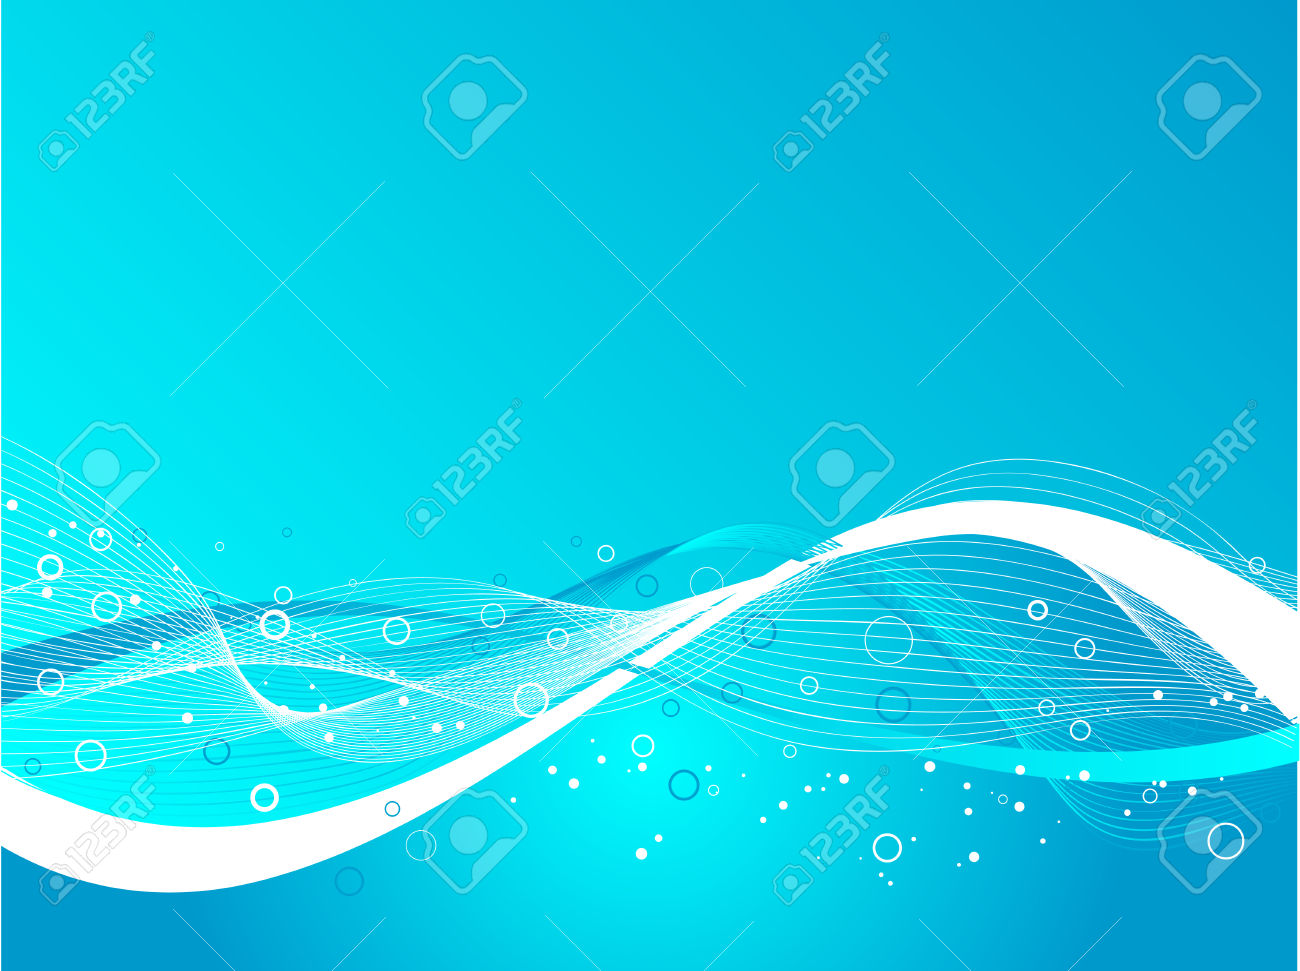 Abstract Background With An Aquatic Theme Royalty Free Cliparts.